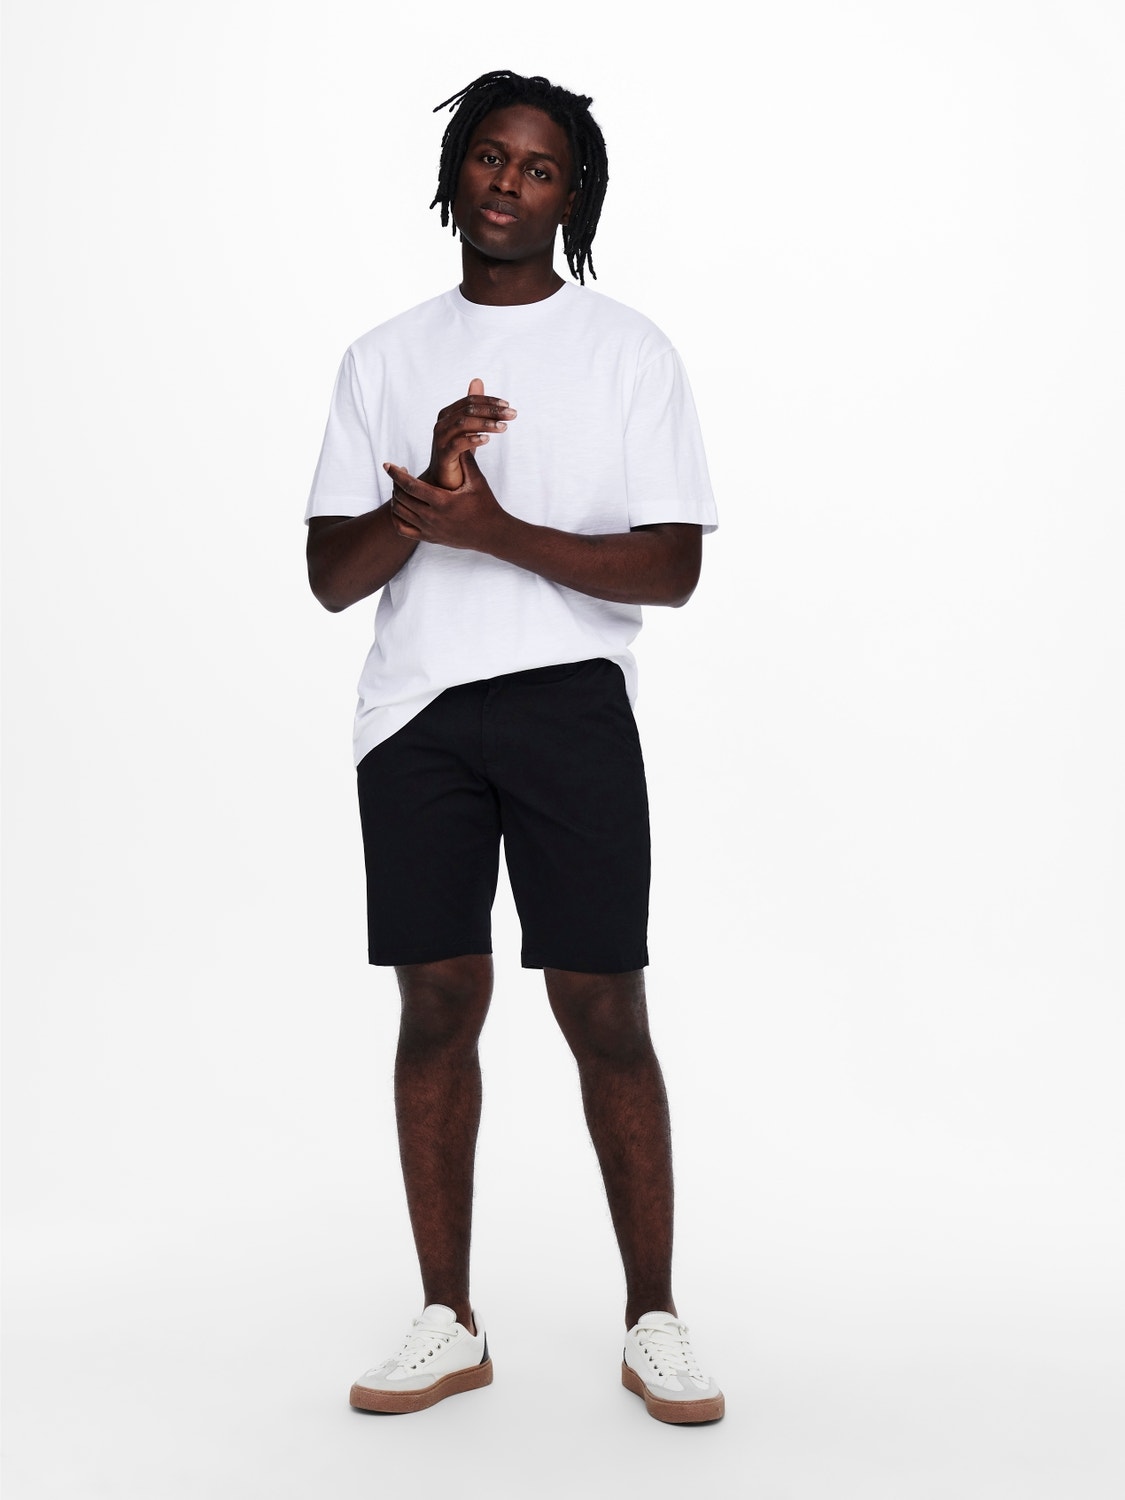 ONLY & SONS Regular fit chino shorts -Black - 22018237